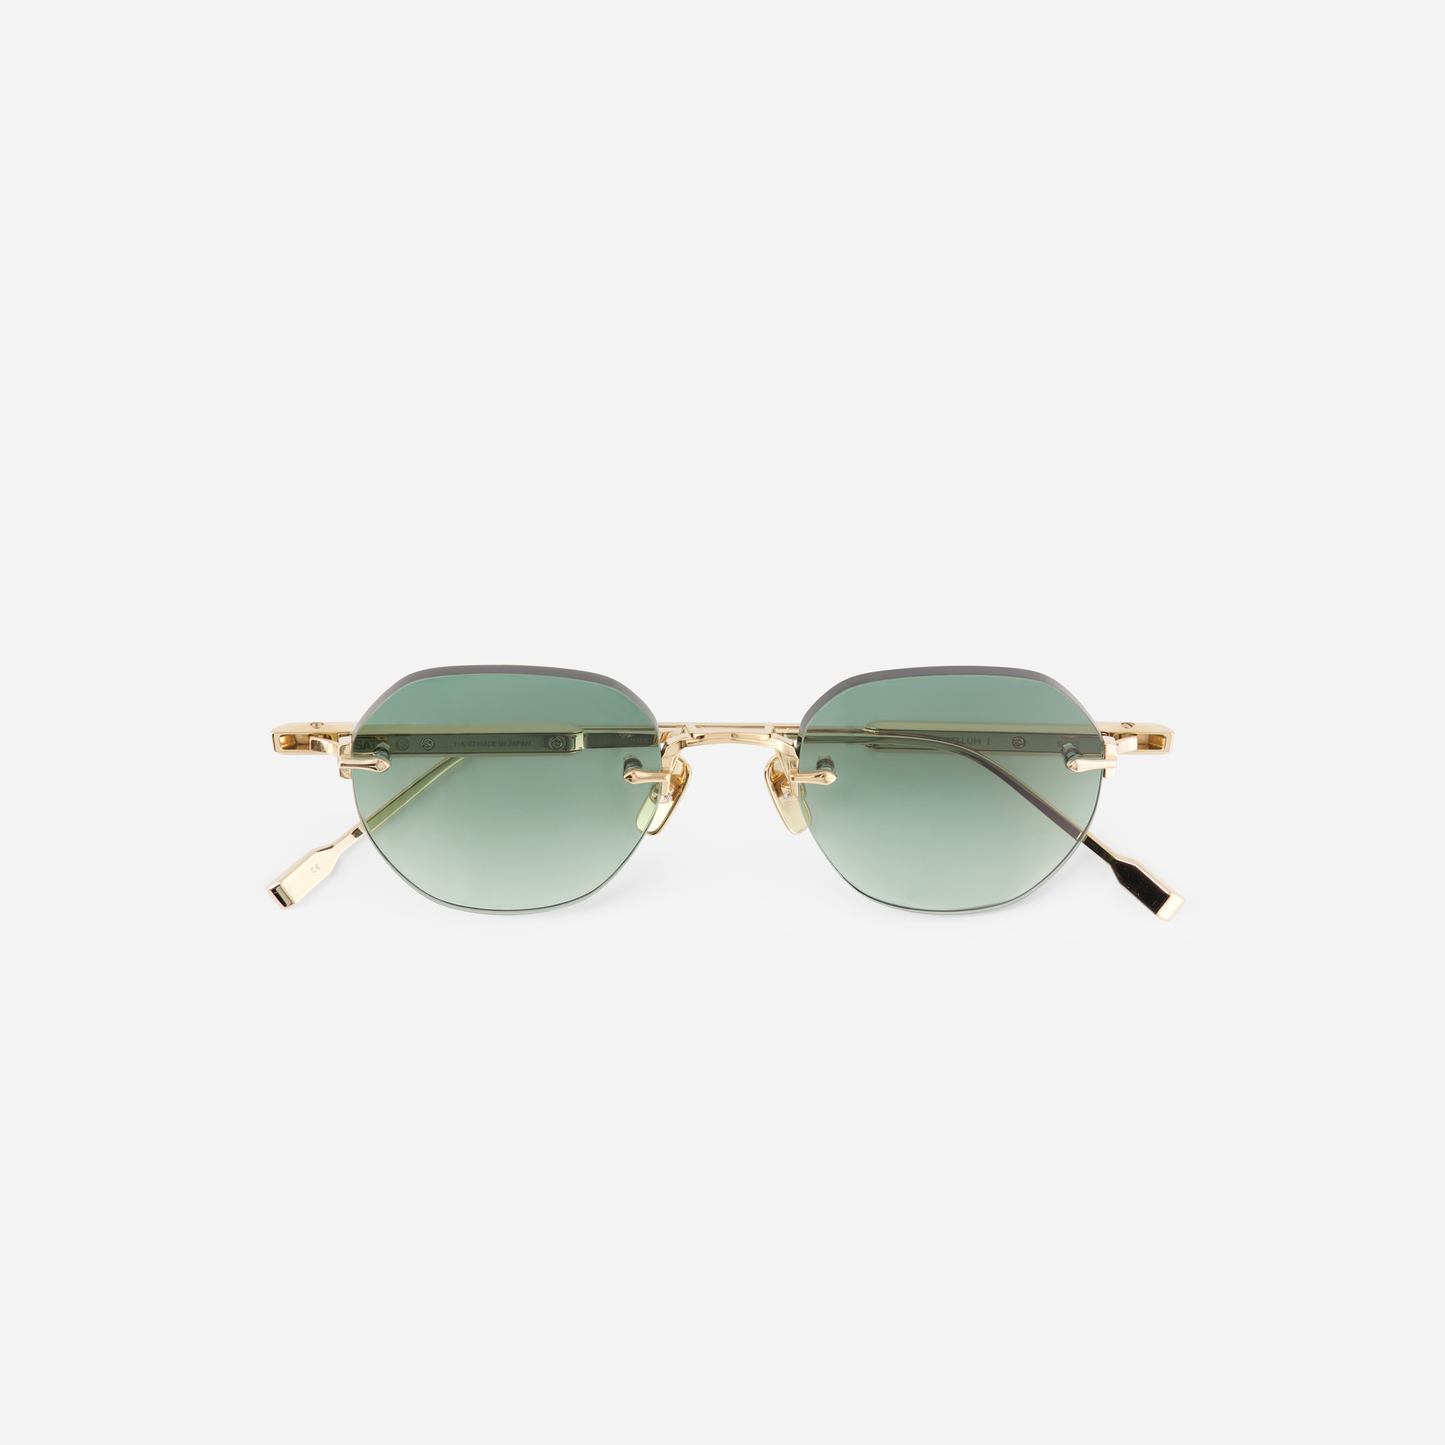 Discover unparalleled chicness with Terebellum Rimless, adorned in Lunar Gold and green-tinted lenses